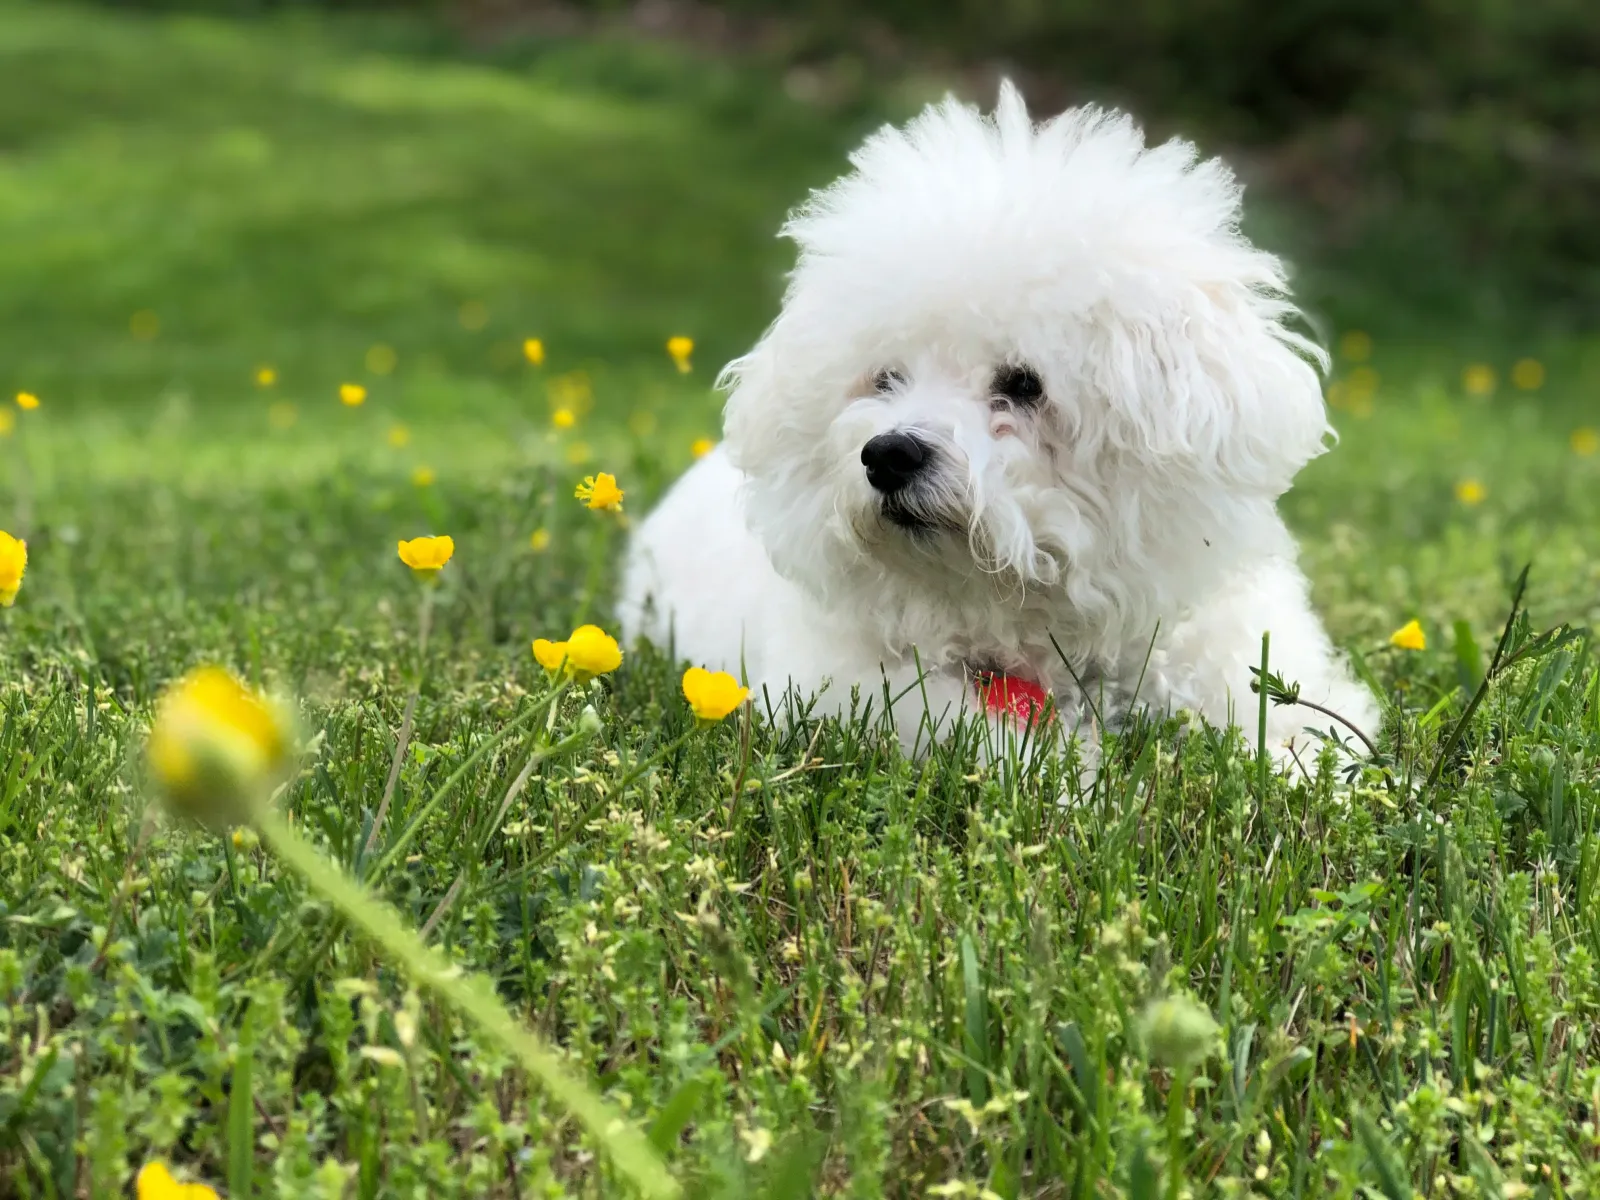 a bichon frise, a hypoallergenic dog breed, sitting in a field of green with some yellow flowers